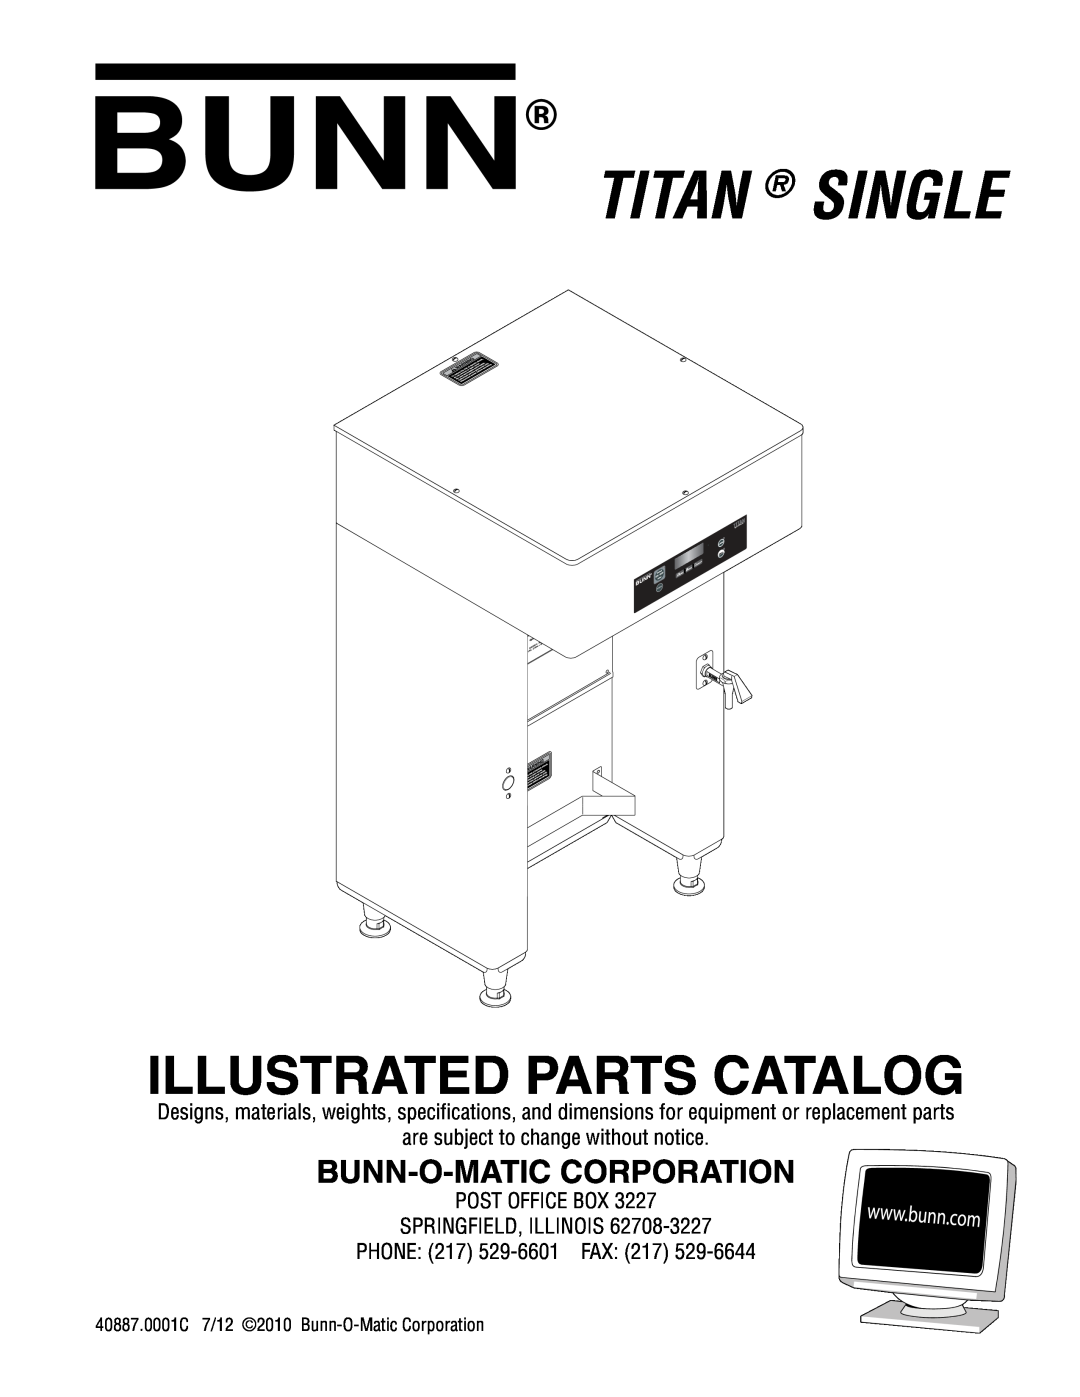 Bunn 2 specifications Bunn-O-Maticcorporation, are subject to change without notice, Post Office Box Springfield, Illinois 